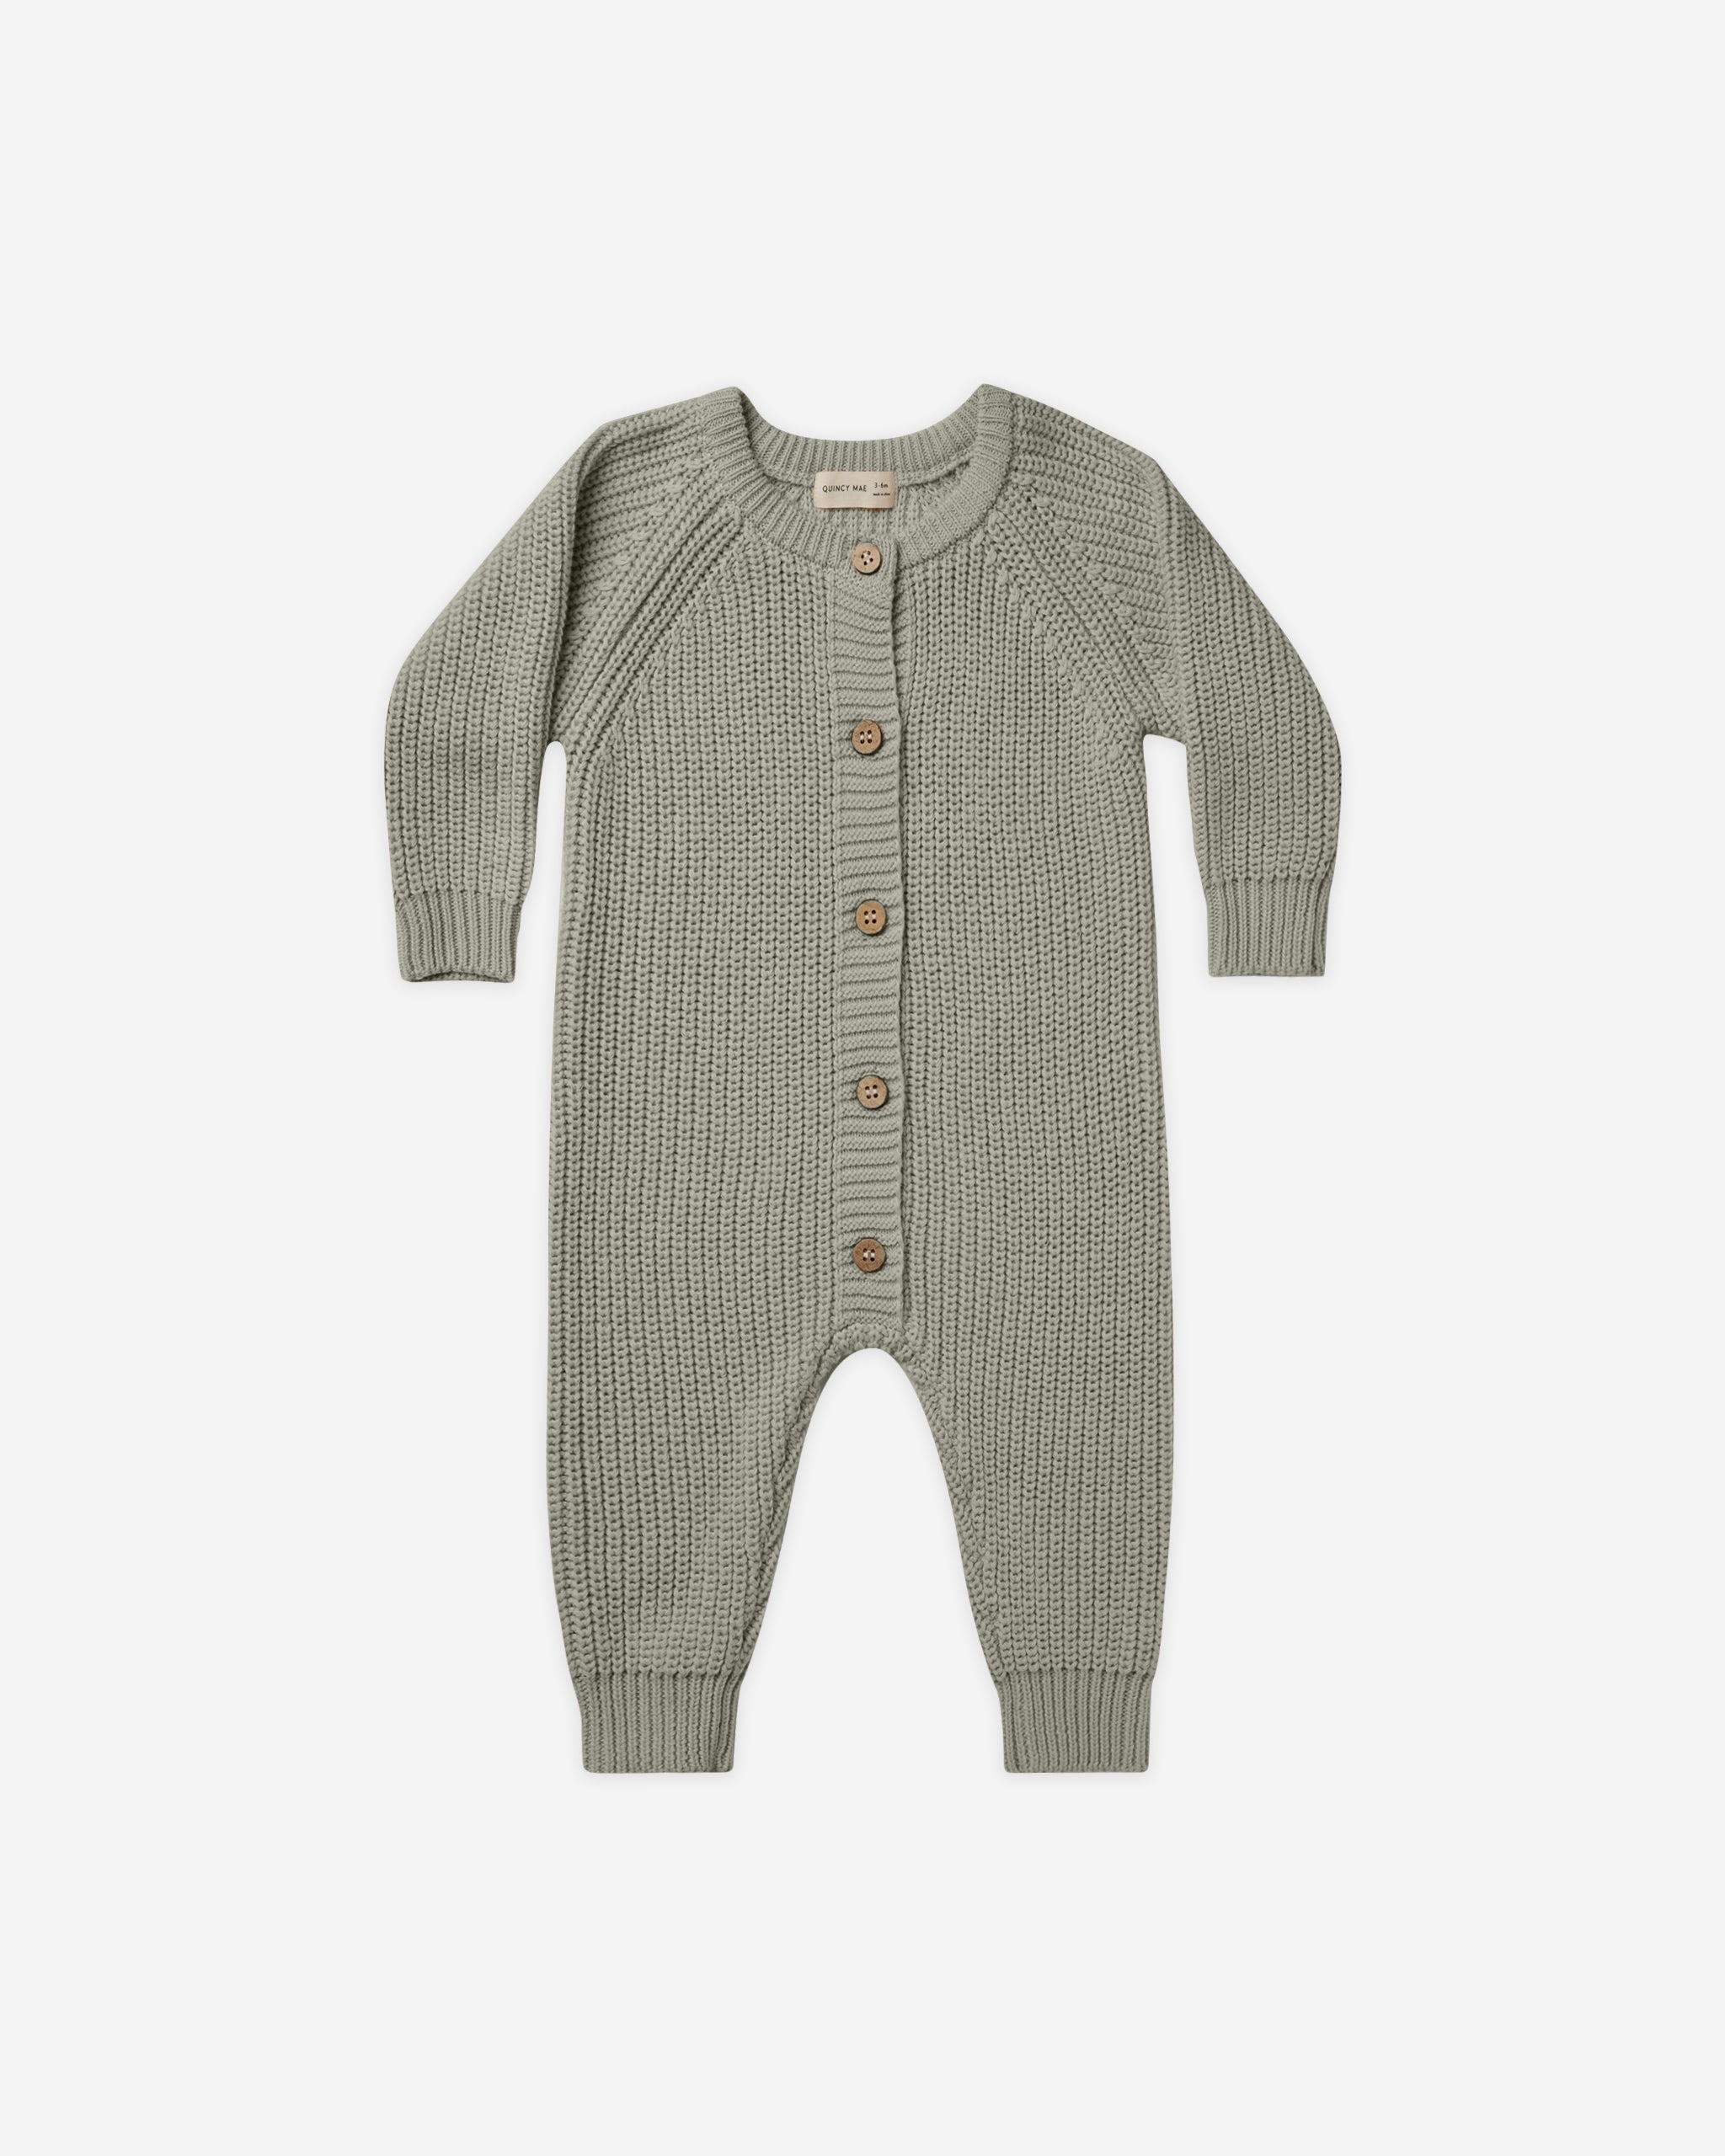 Chunky Knit Jumpsuit || Basil - Rylee + Cru | Kids Clothes | Trendy Baby Clothes | Modern Infant Outfits |